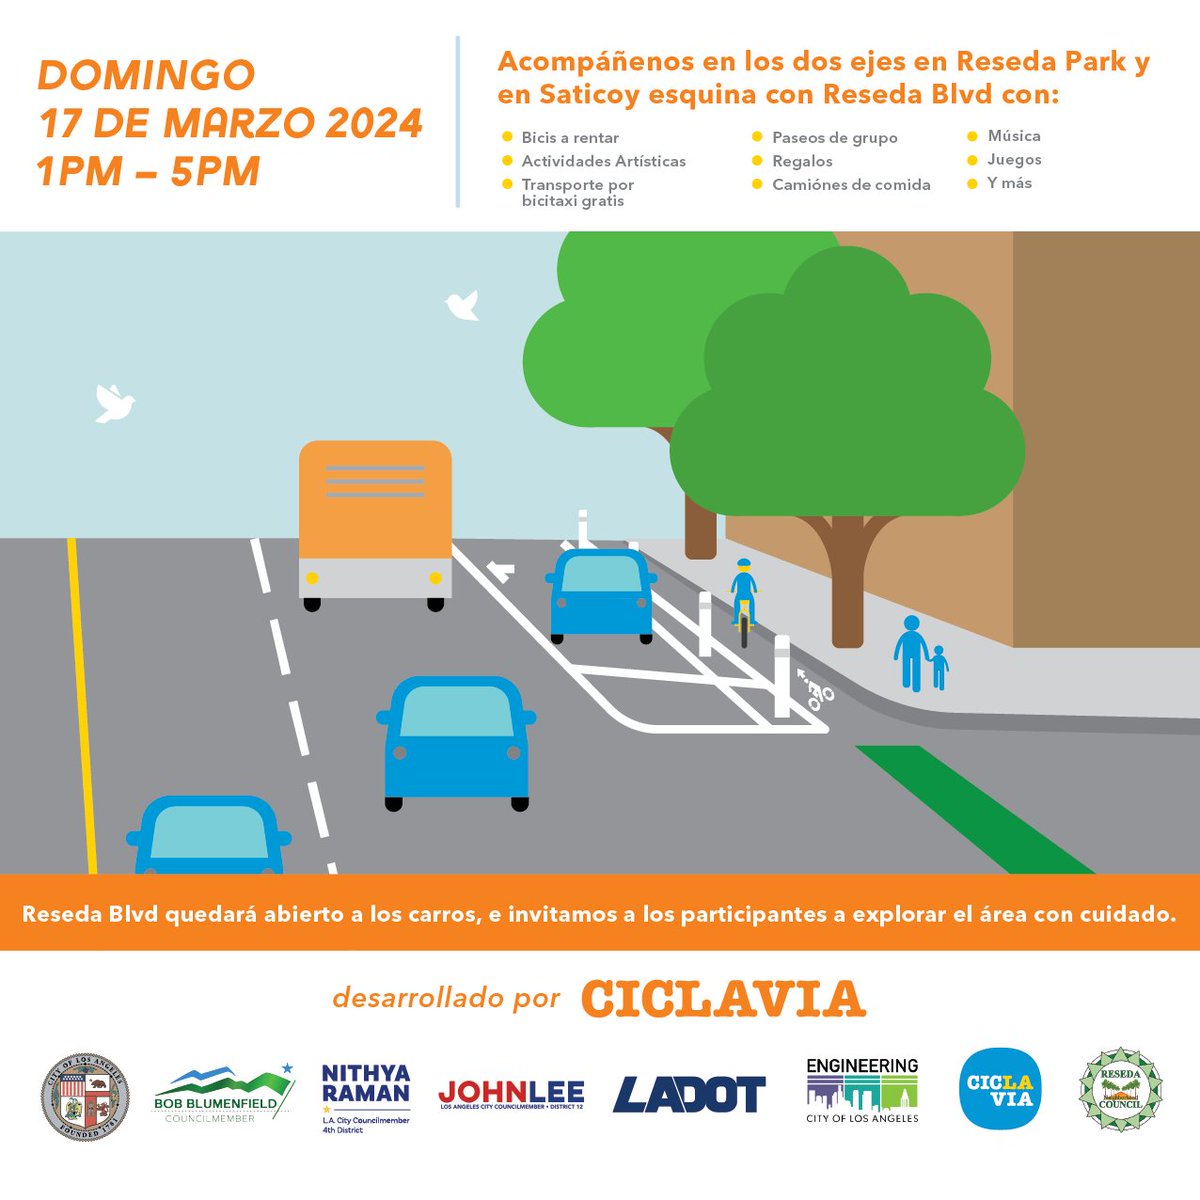 This Sunday! Celebrate the new safety improvements along Reseda Blvd at 'Ready for Reseda' - a free event by @CicLAvia. Experience protected bike lanes & more! Reseda Blvd is open to cars, so explore safely! Enjoy biking, skating, and activities from Saticoy to Reseda Park.